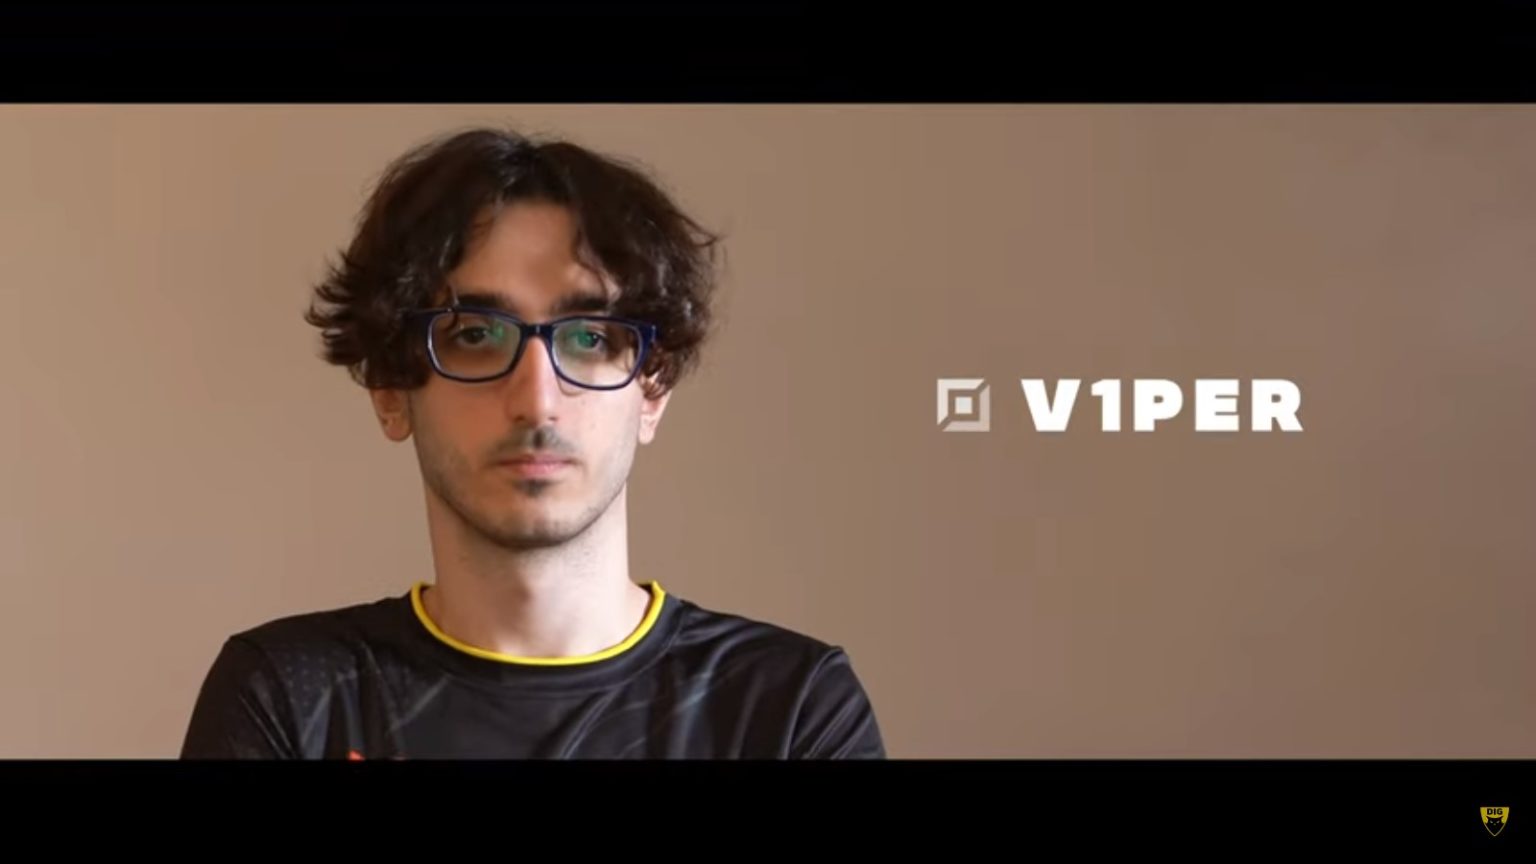 V1per will start for Dignitas in Week One of the 2020 Summer Split